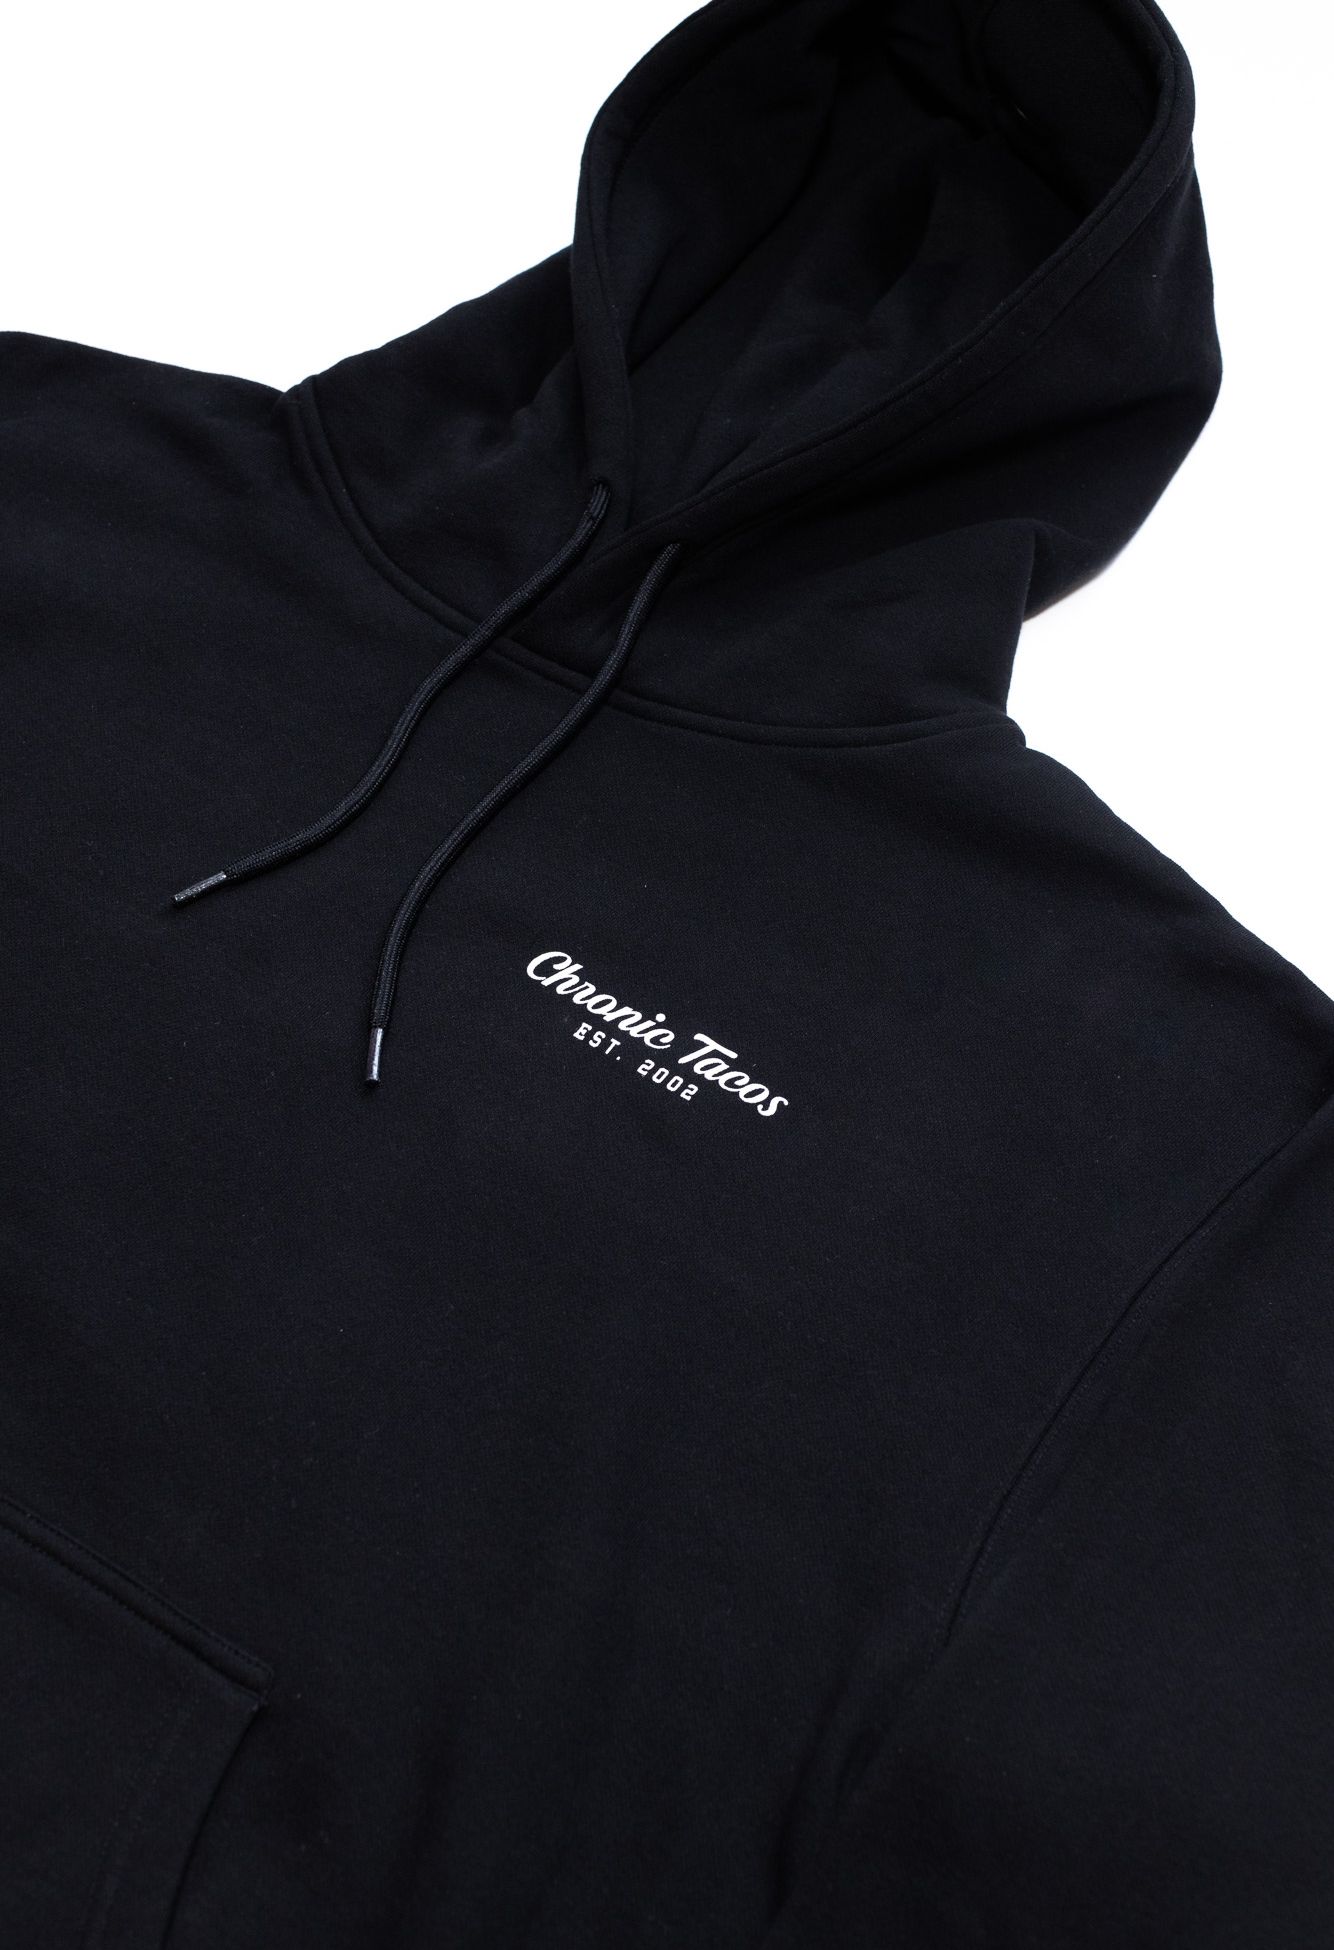 Chronic Tacos Unveils Exclusive Black Friday Deals and Winter Drop Merchandise